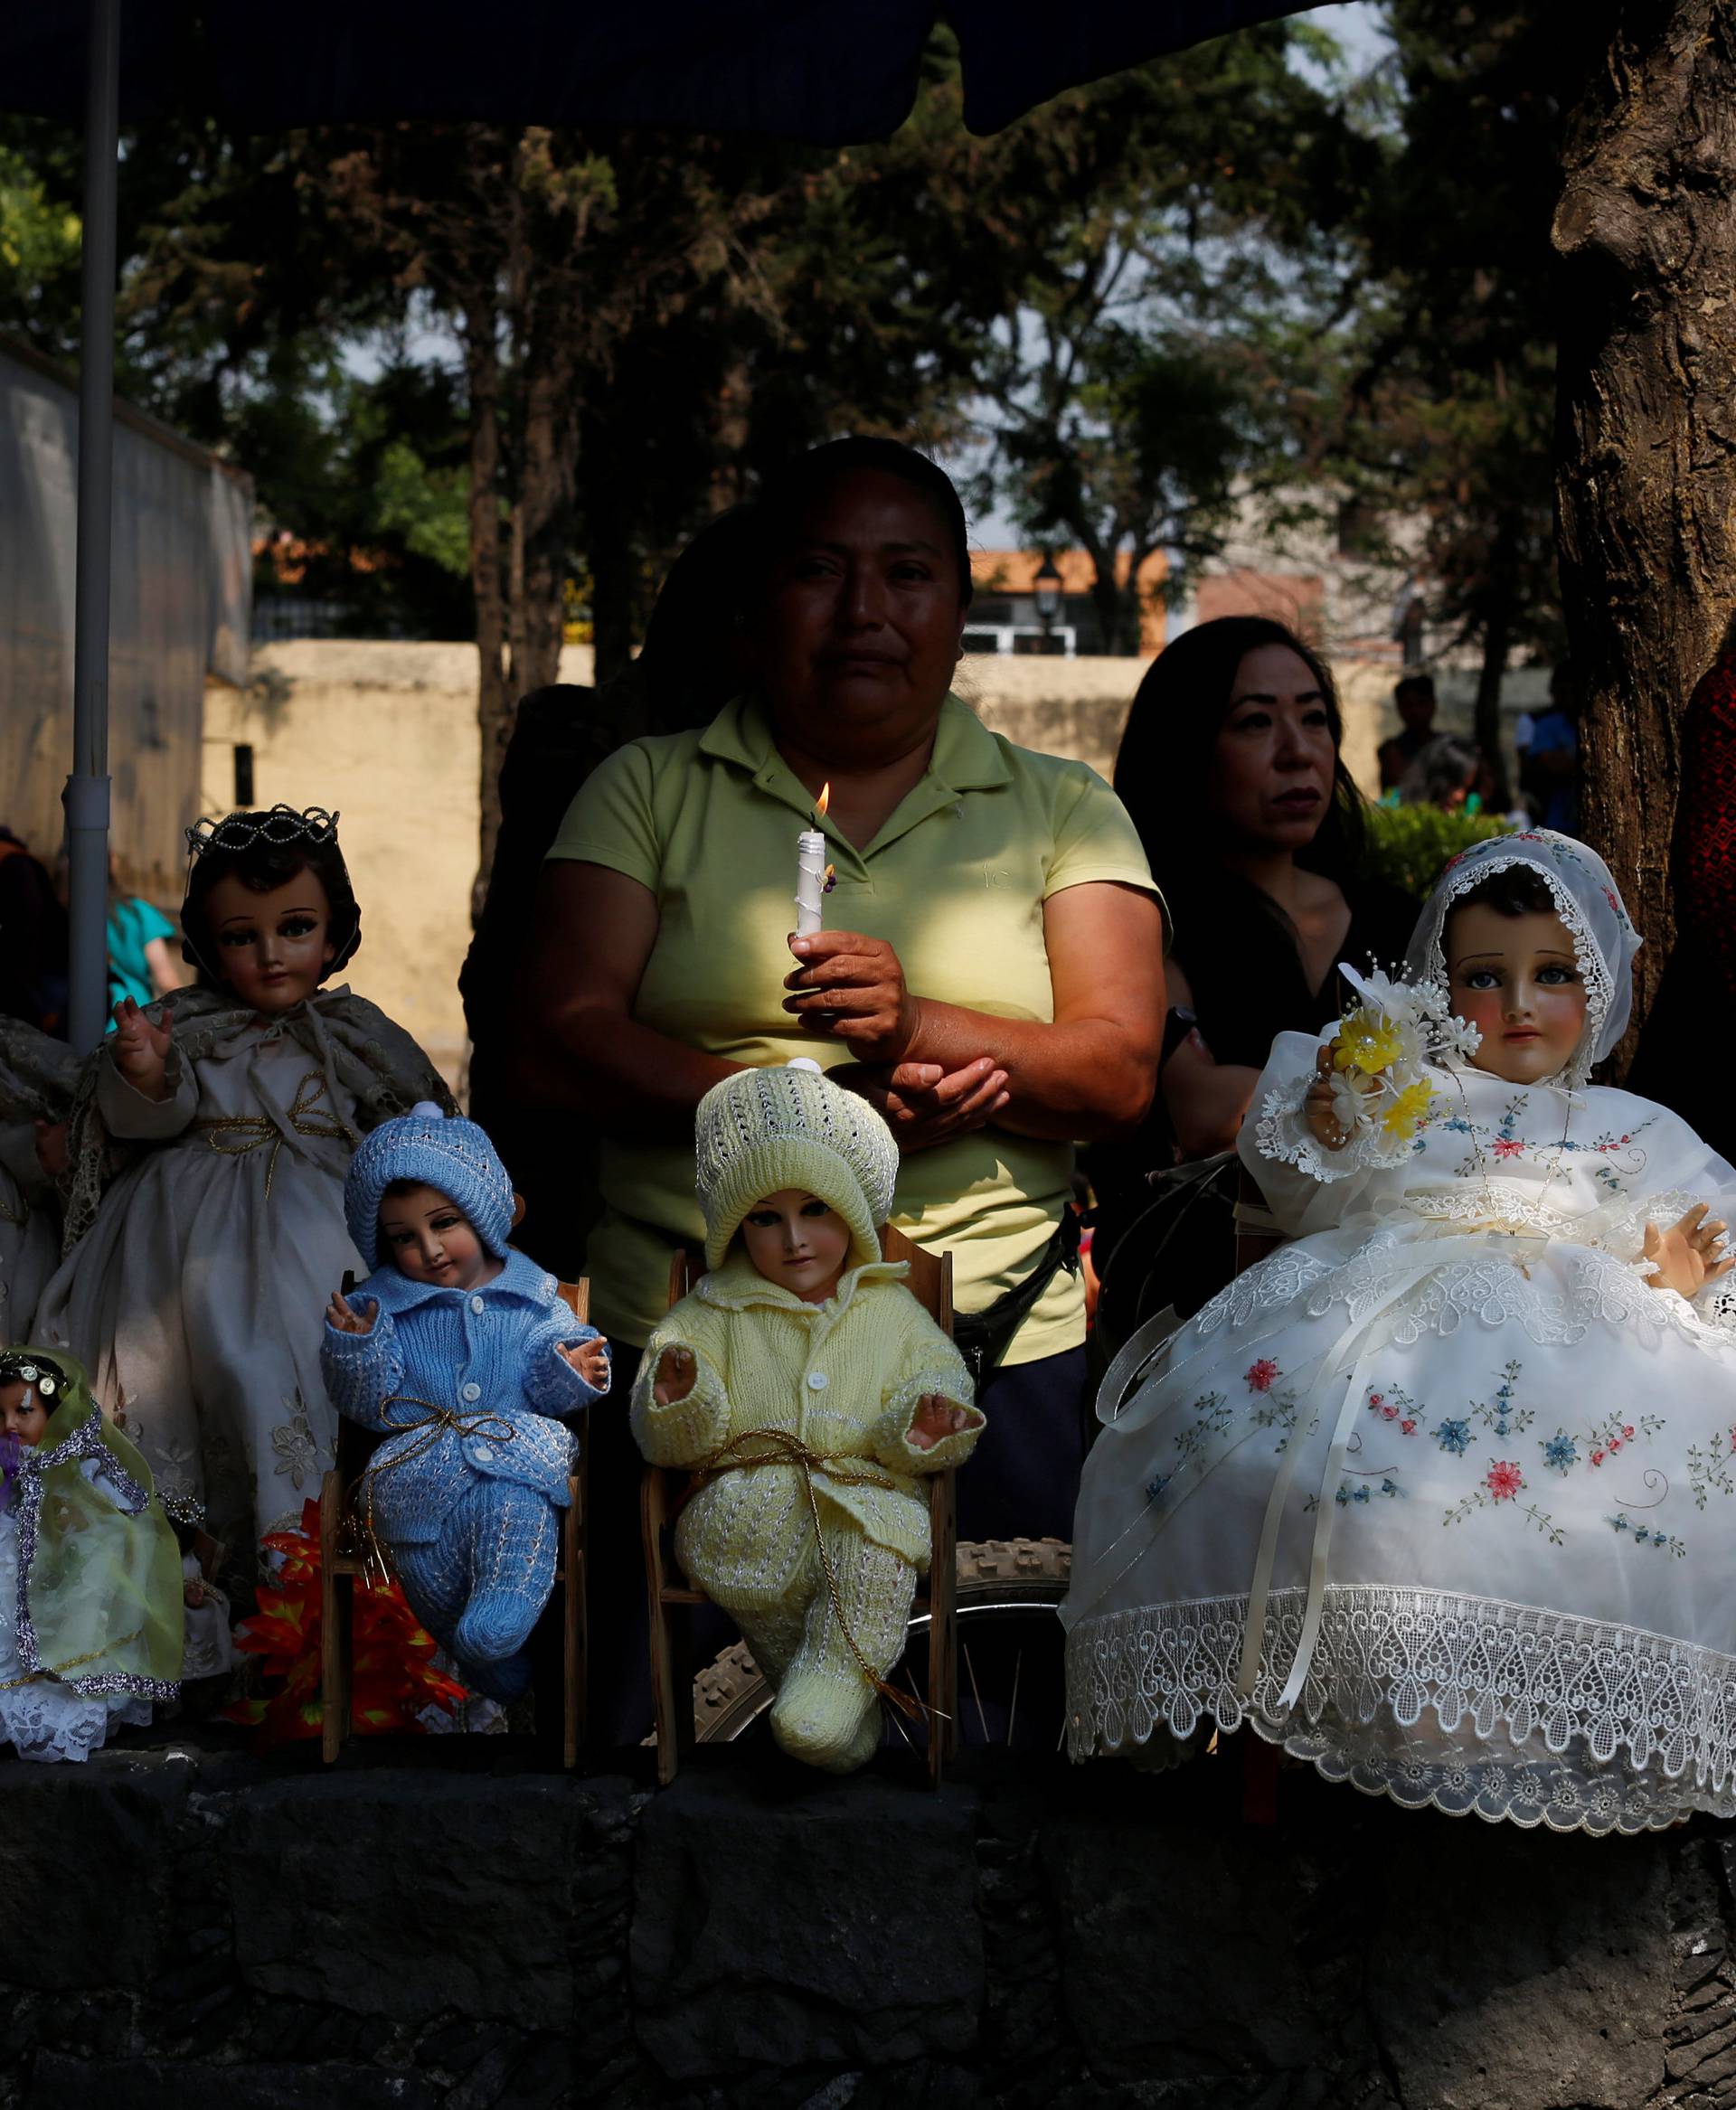 Dressed-up dolls representing baby Jesus are pictured during the annual mass of the Feast of Candelaria celebration in Mexico City